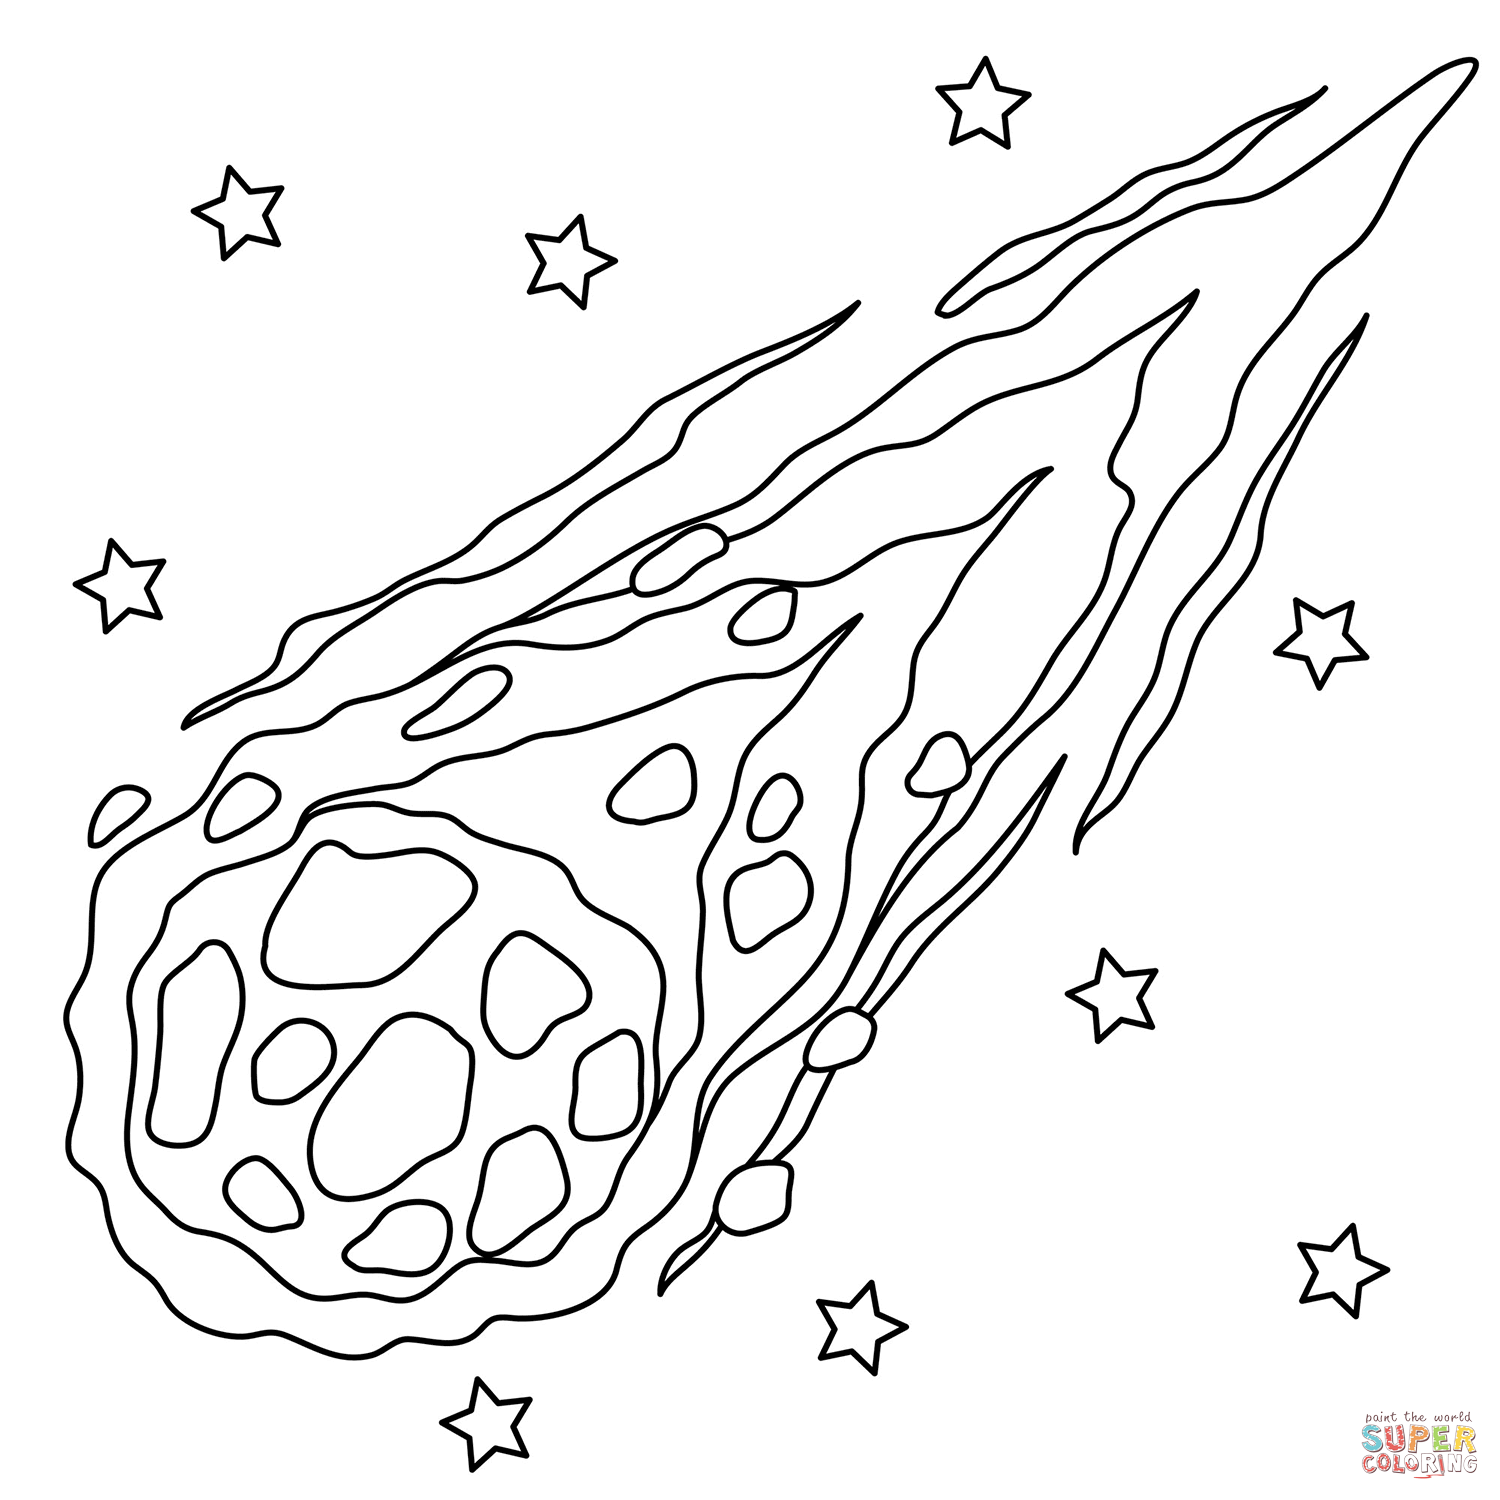 Meteor coloring page free printable coloring pages